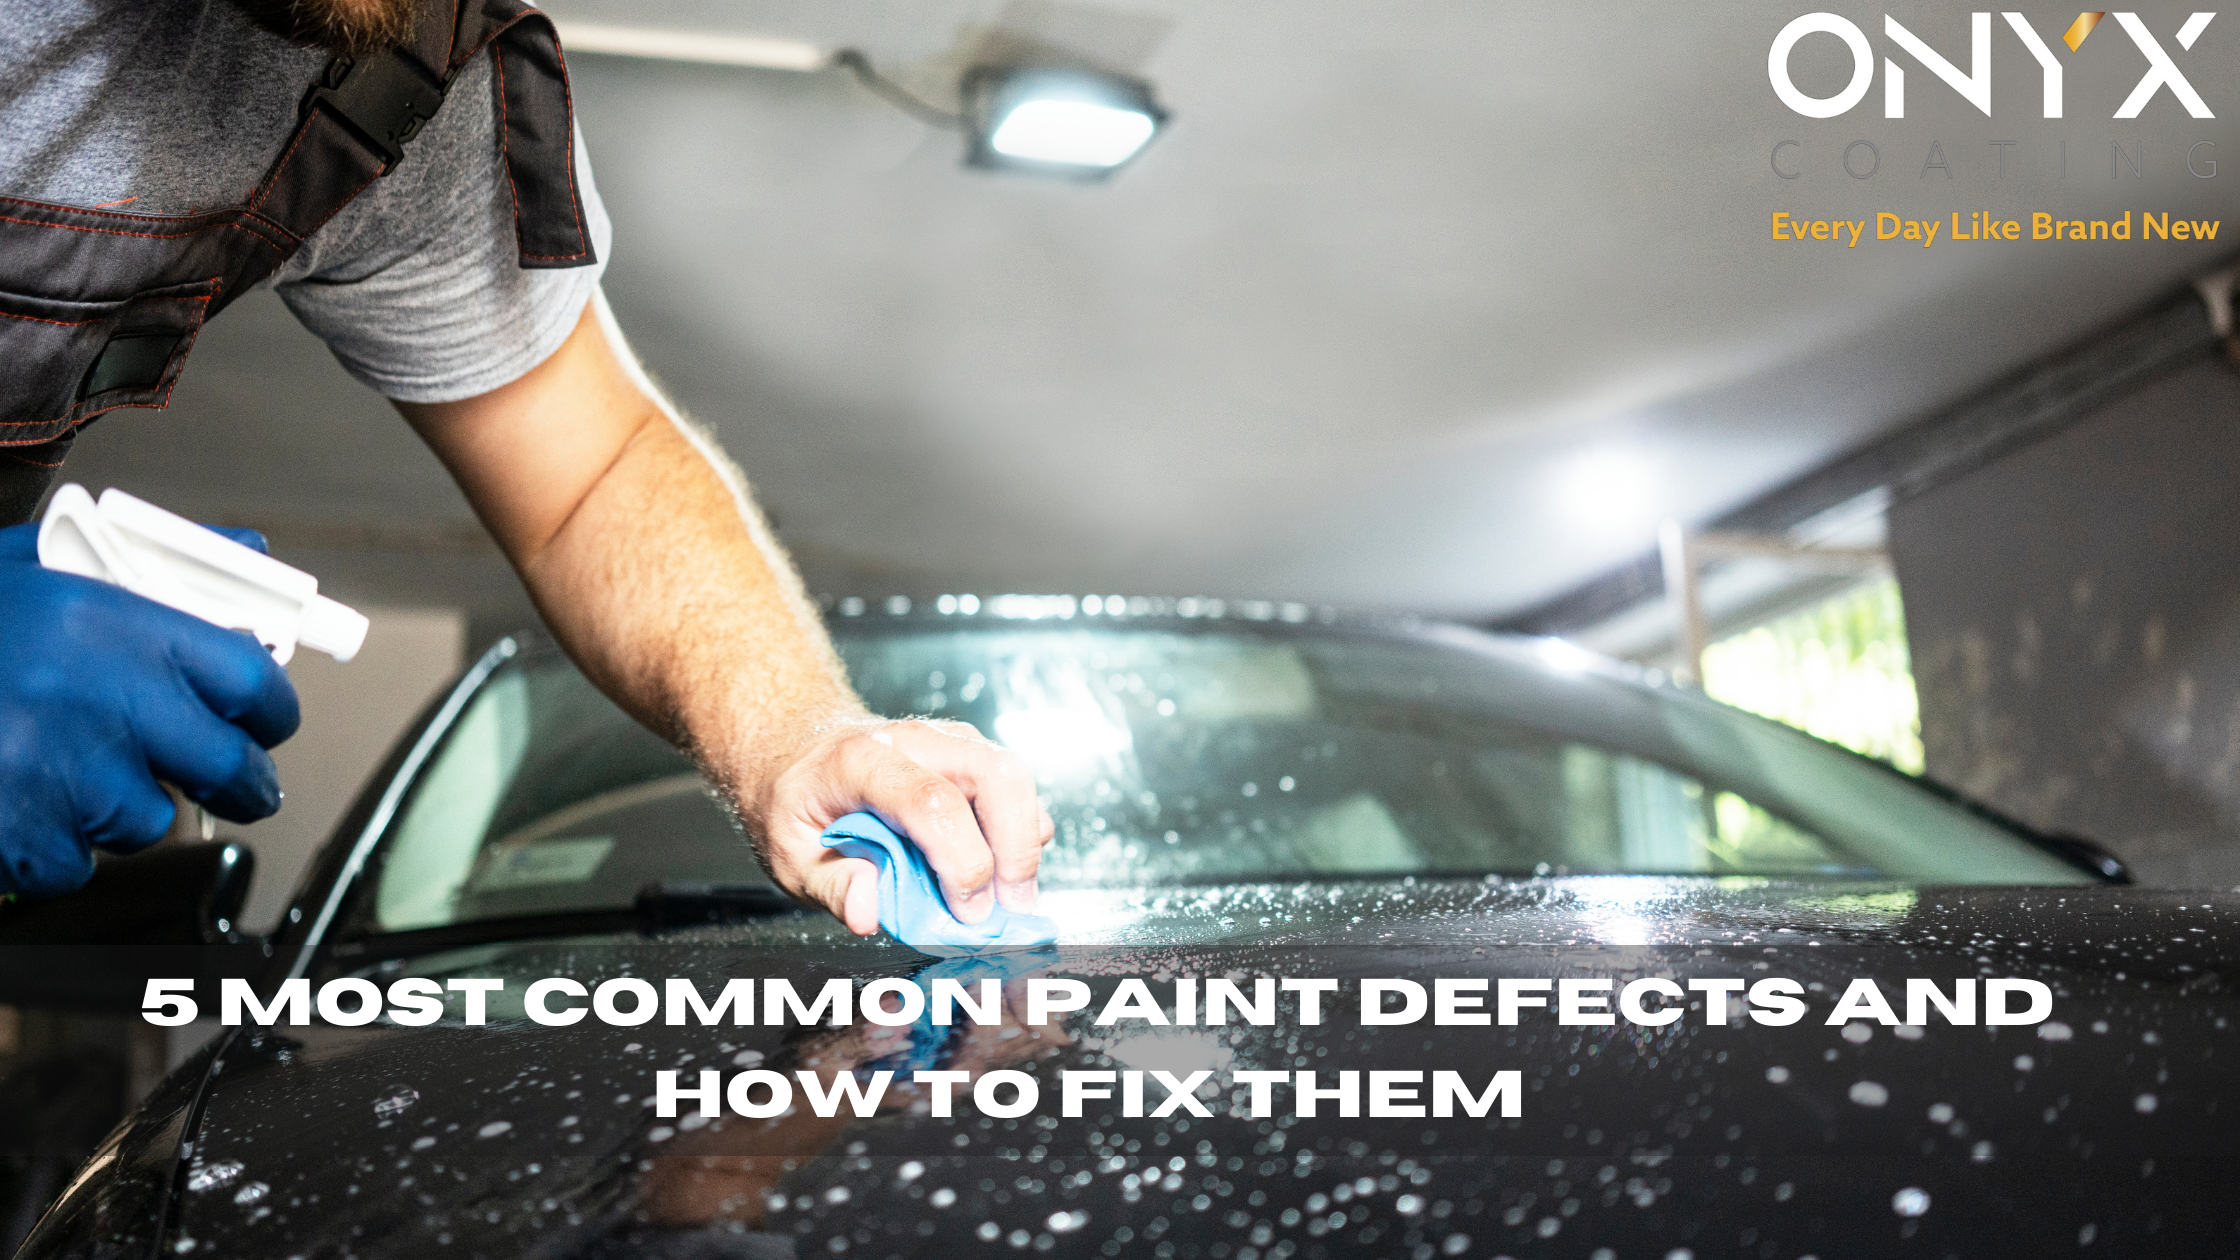 5 most common paint defects and how to fix them